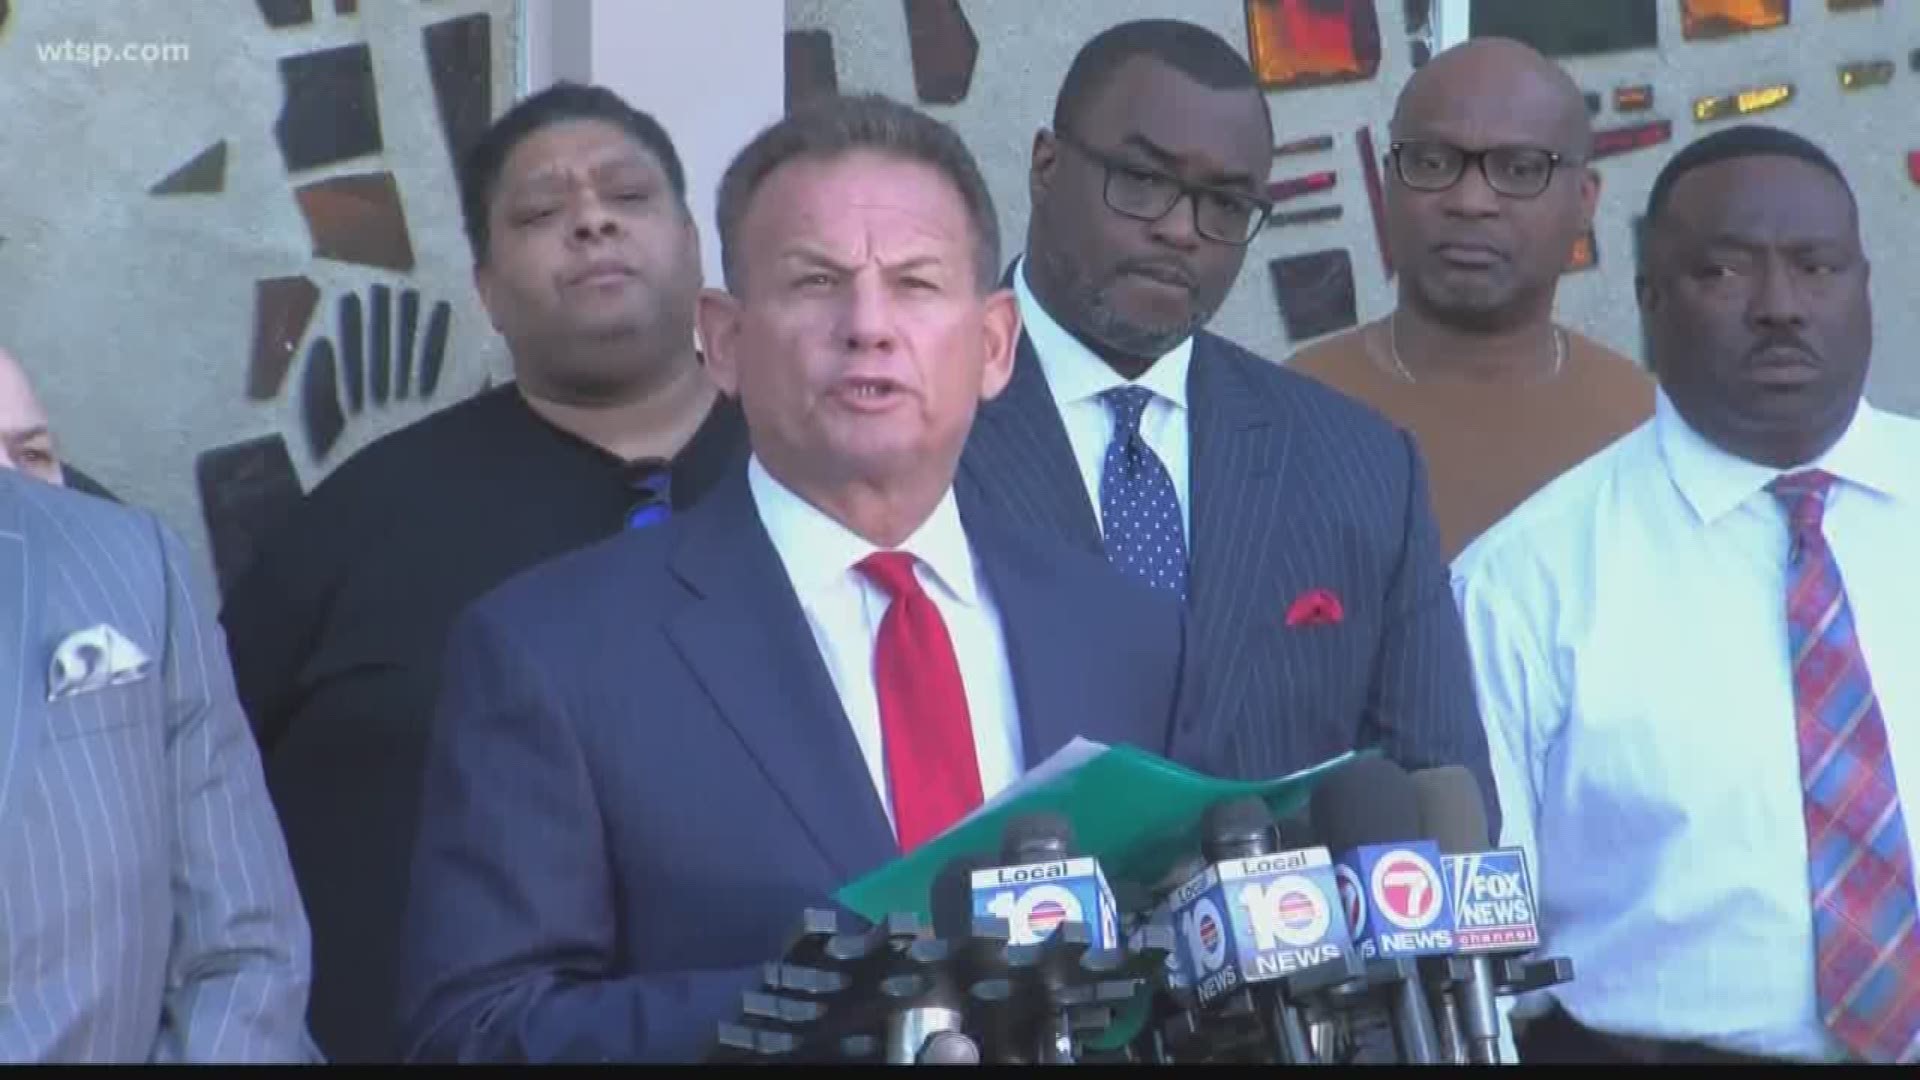 Scott Israel says statements made by the governor have tainted his chances of getting a fair hearing from lawmakers.